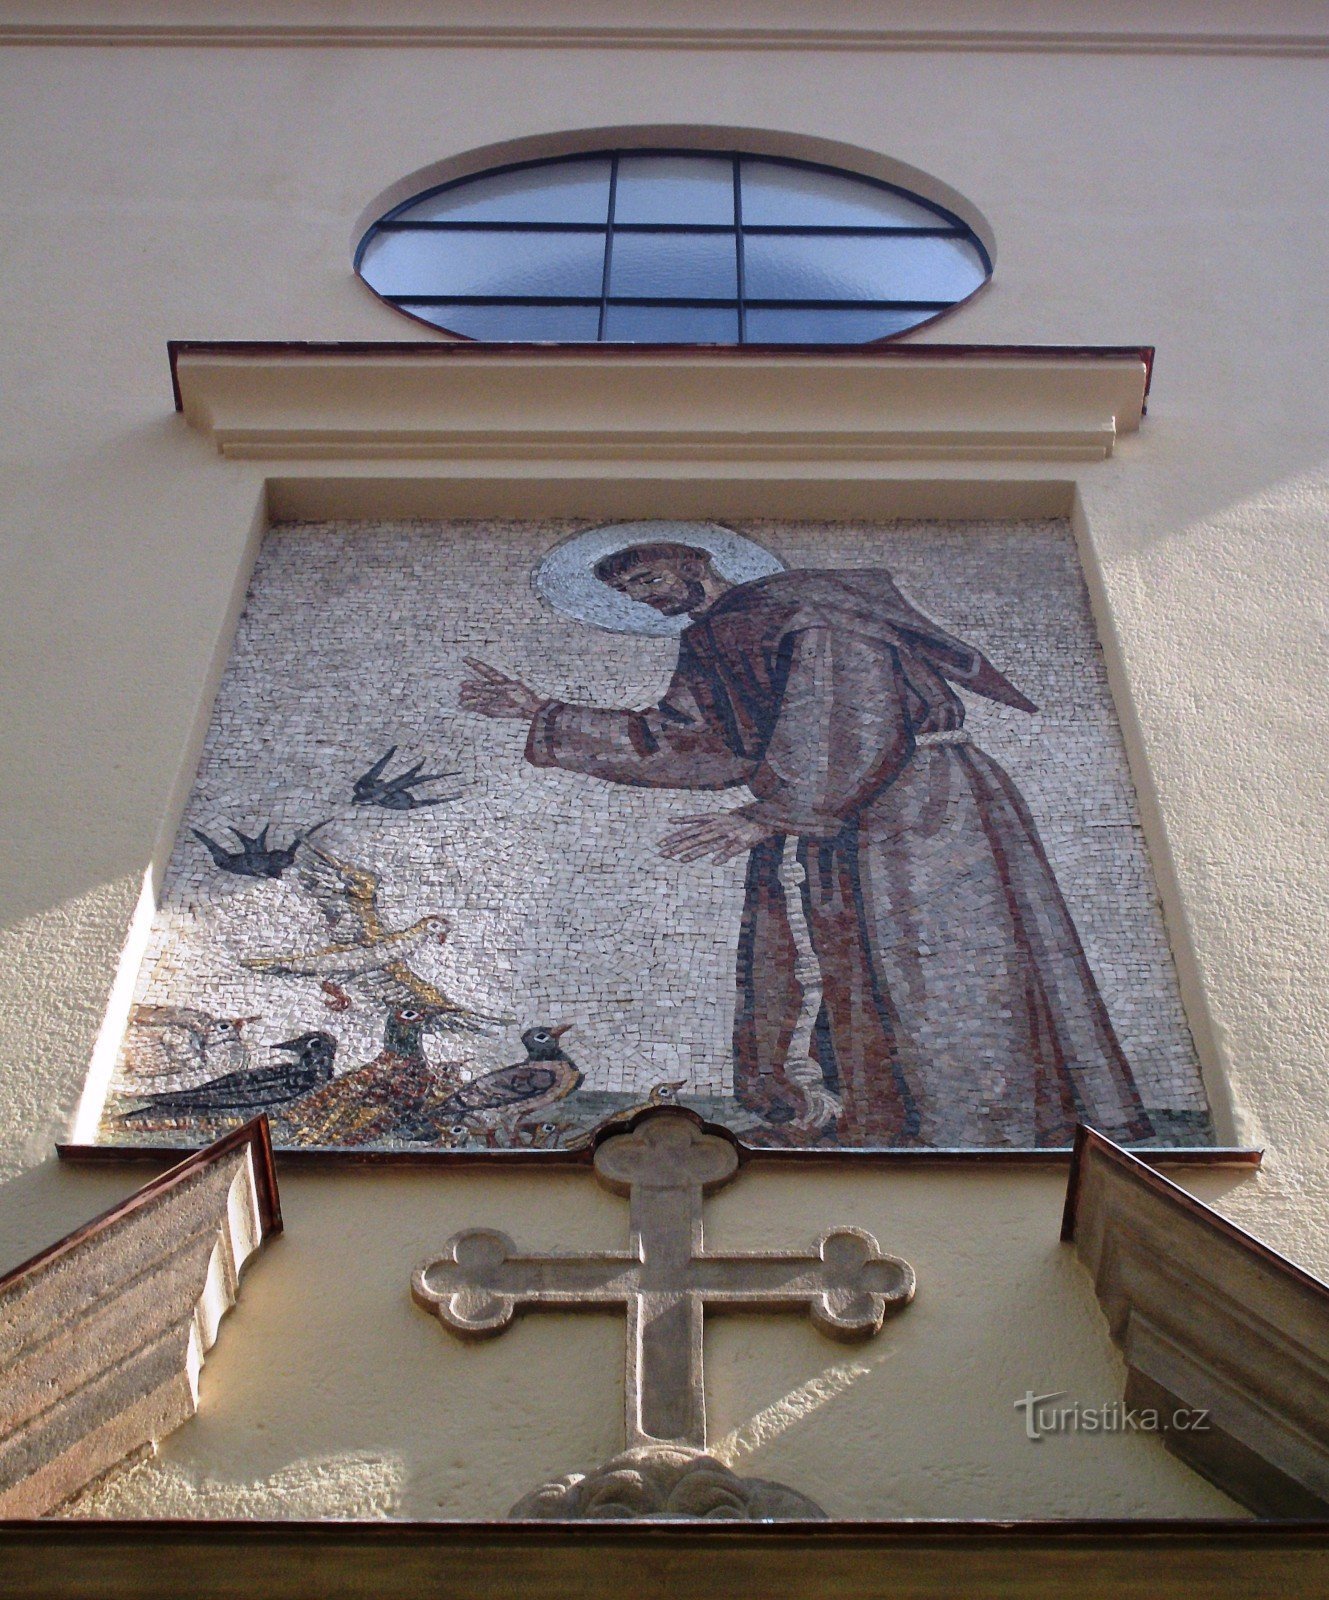 mosaic - St. Francis of Assisi preaching to the birds